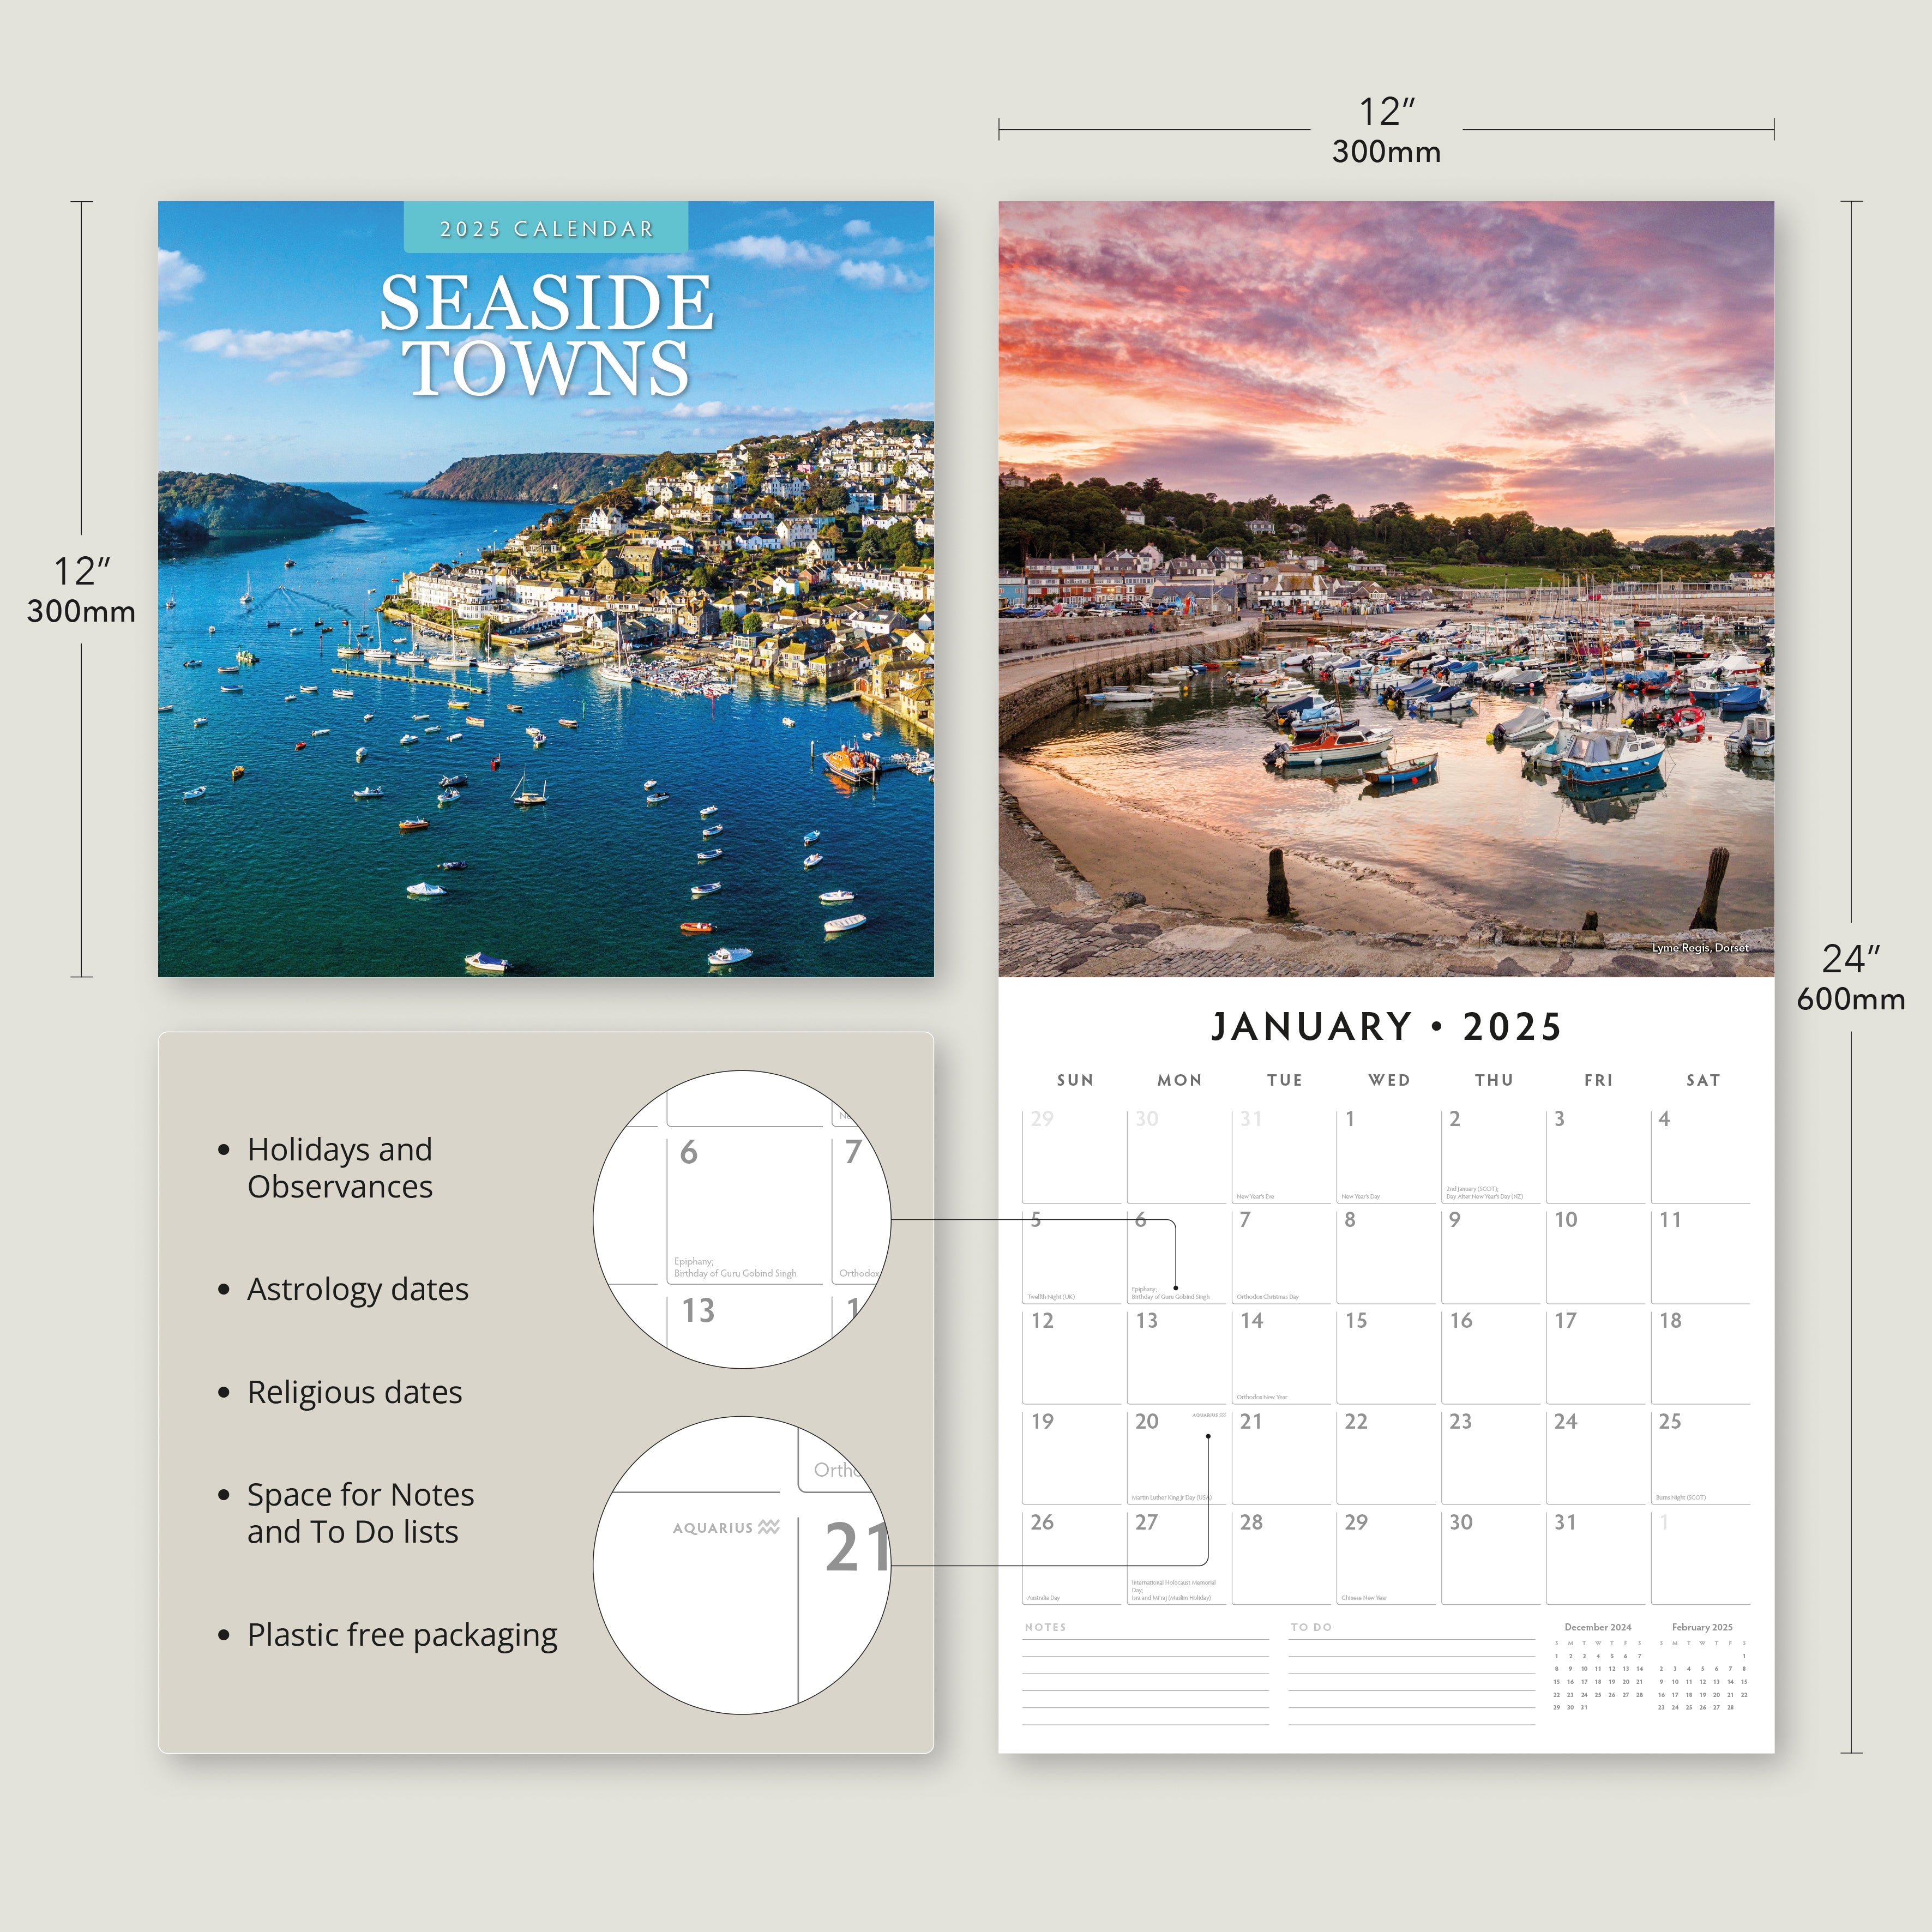 2025 Seaside Towns - Square Wall Calendar